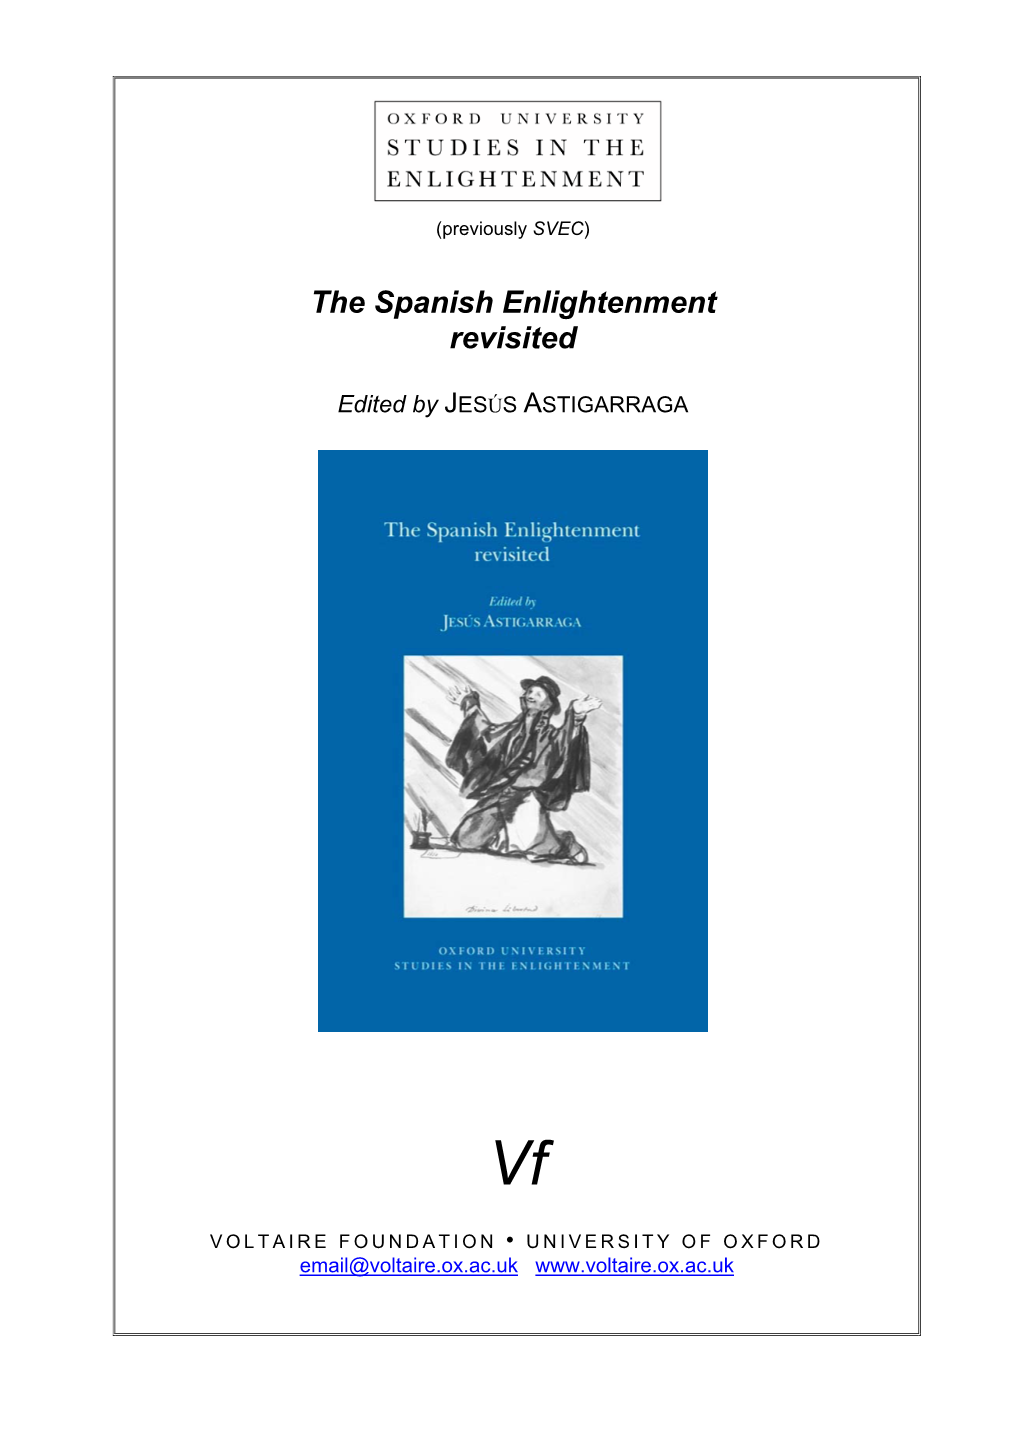 The Spanish Enlightenment Revisited